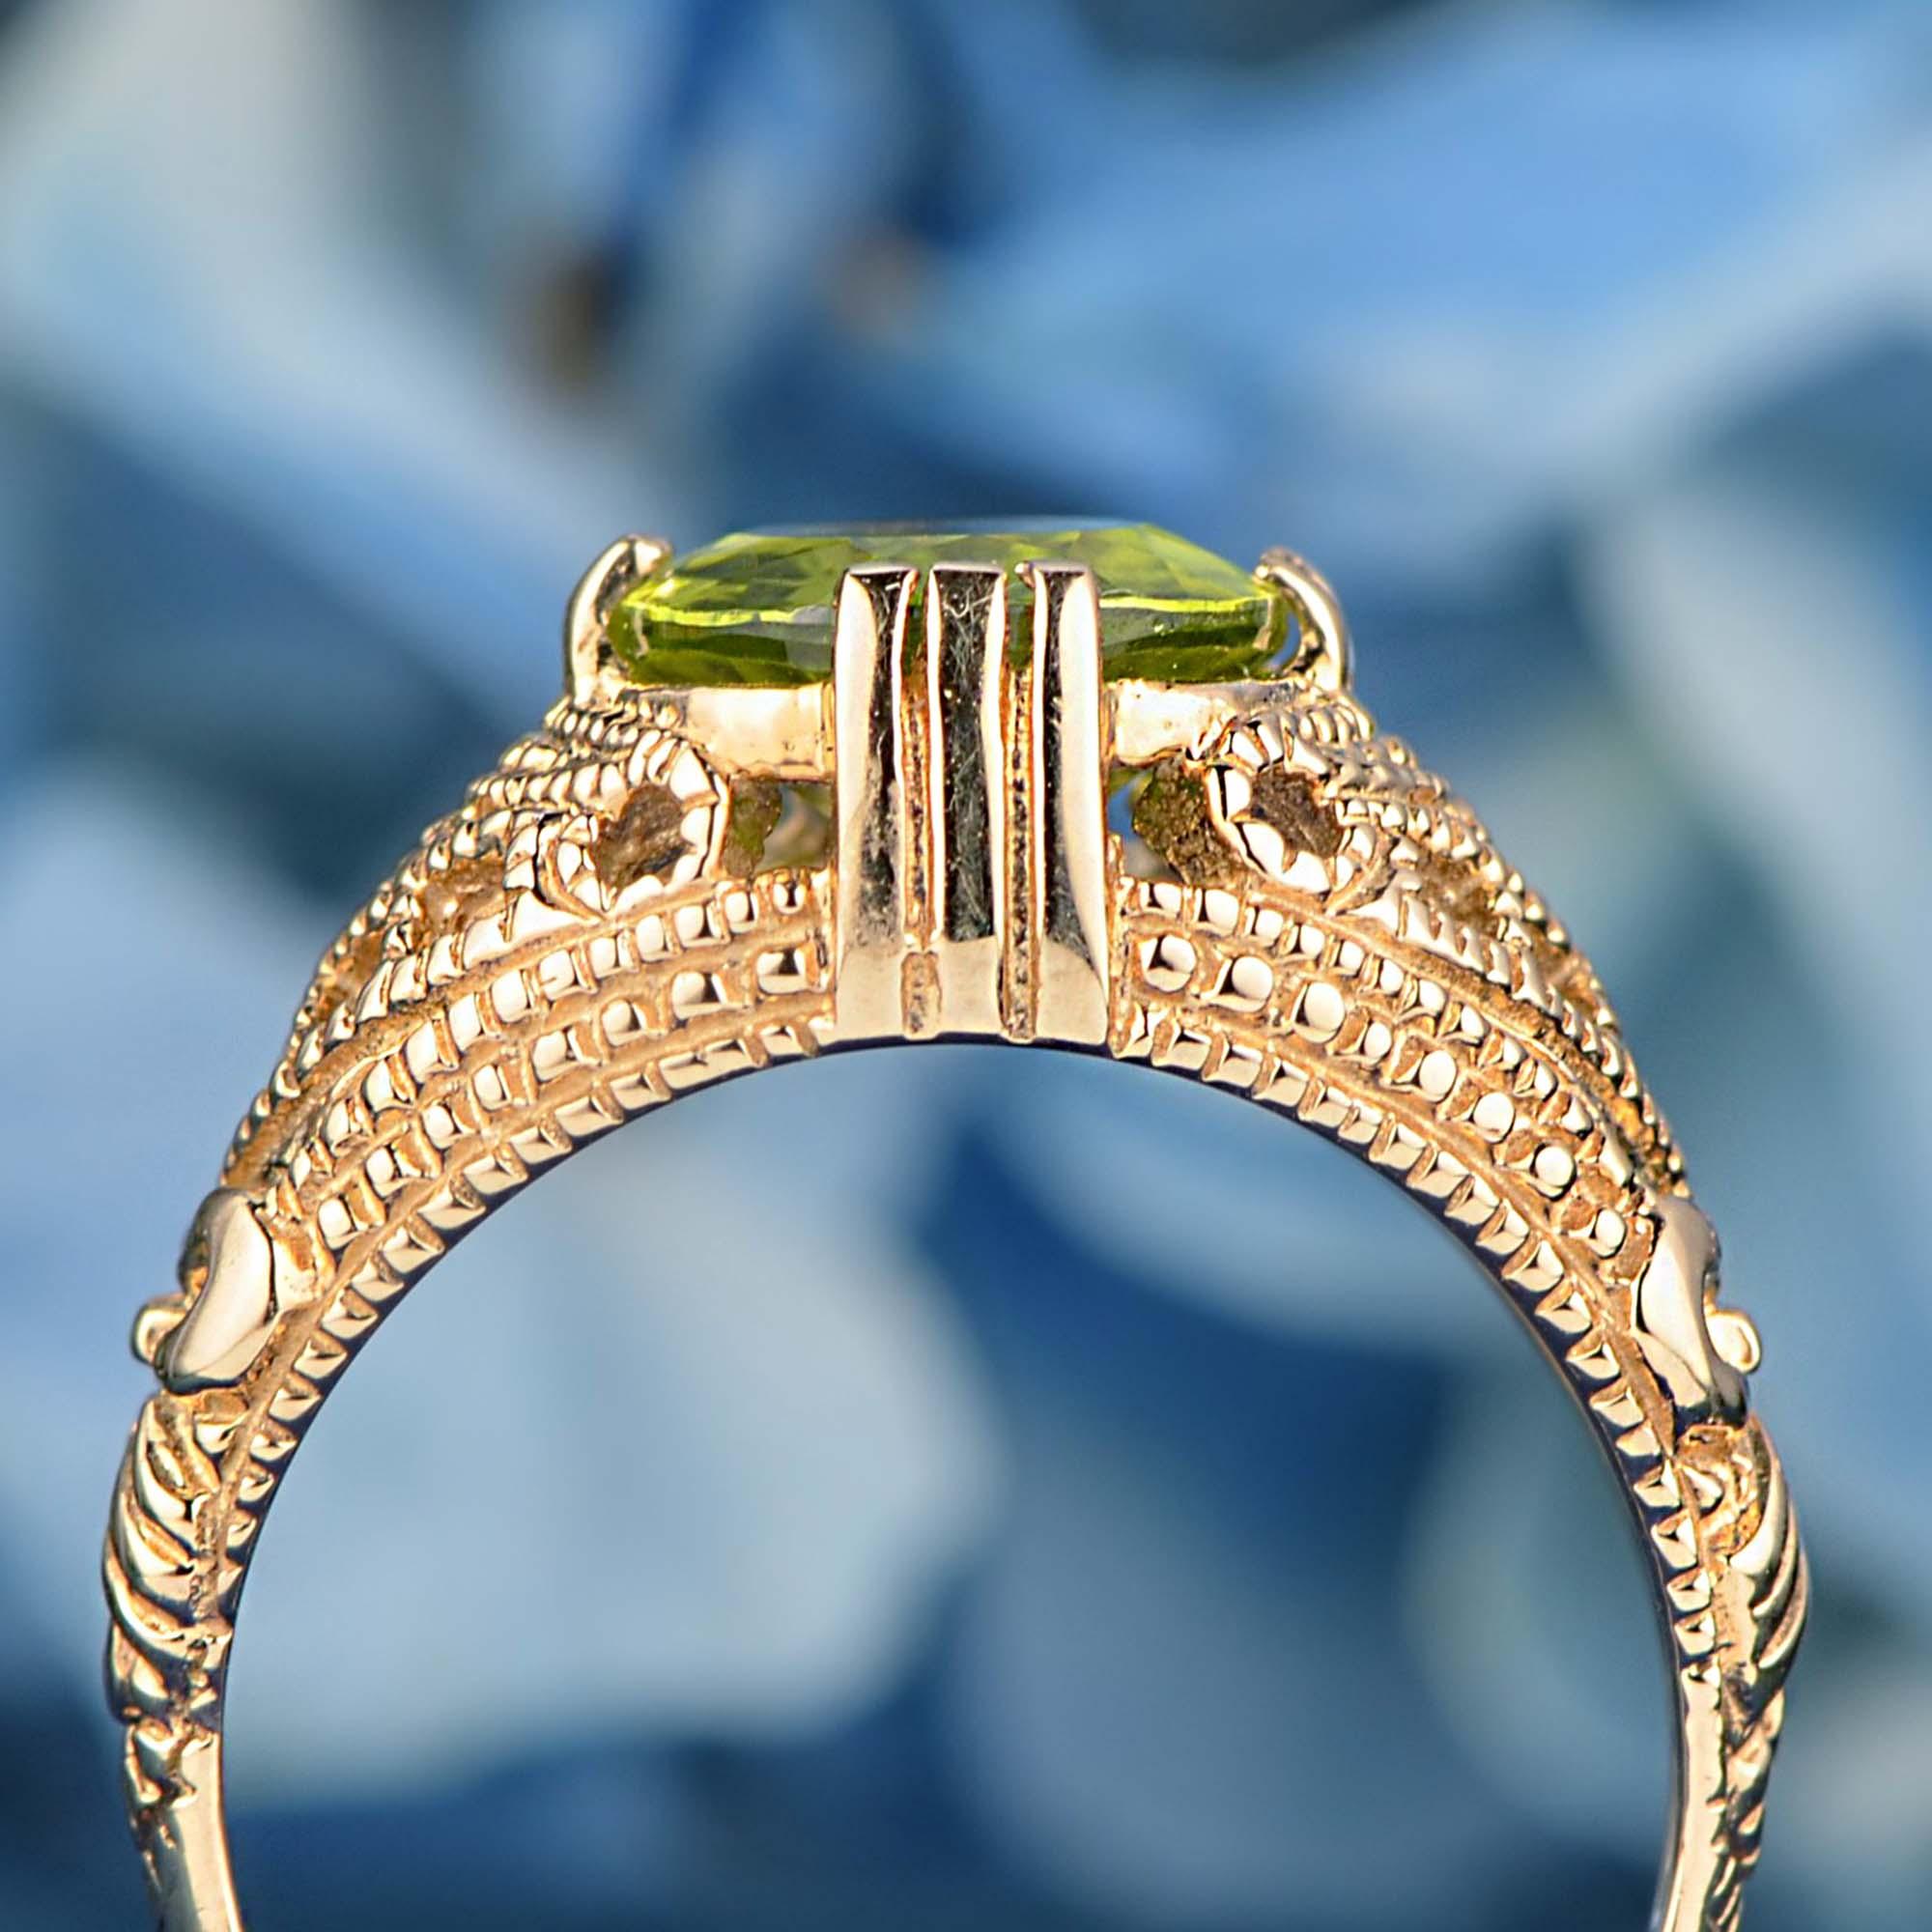 For Sale:  Natural Peridot Vintage Style Filigree Cocktail Ring in 9K Yellow Gold 5